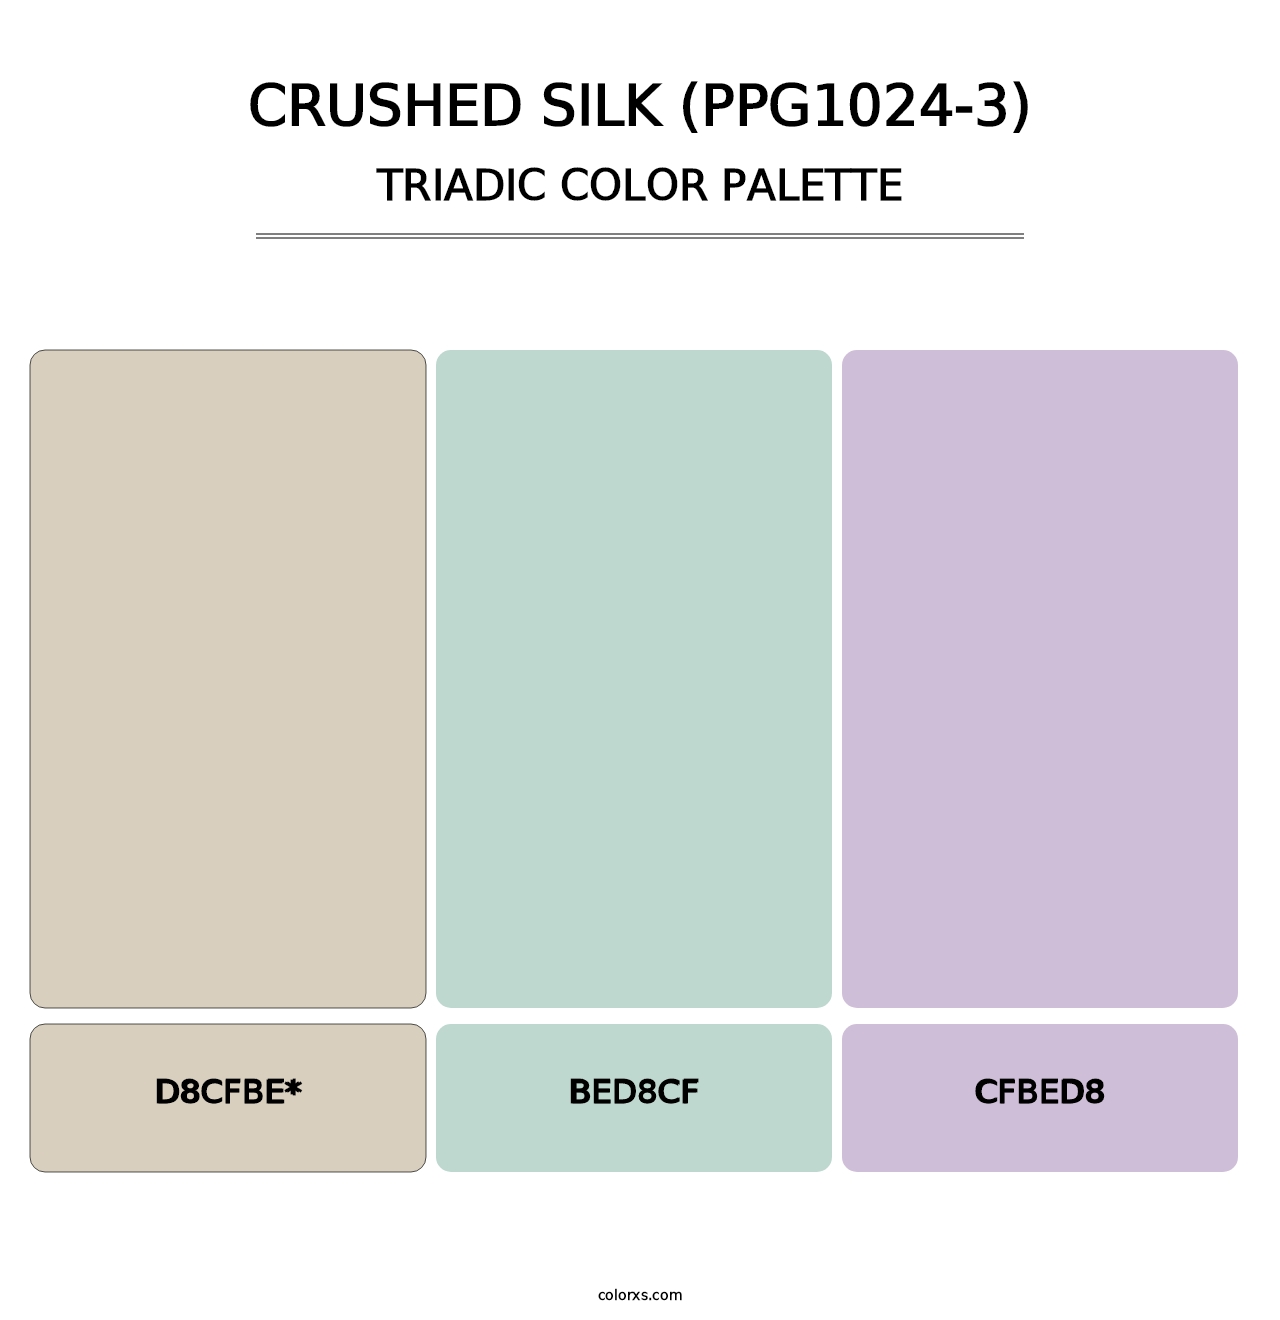 Crushed Silk (PPG1024-3) - Triadic Color Palette